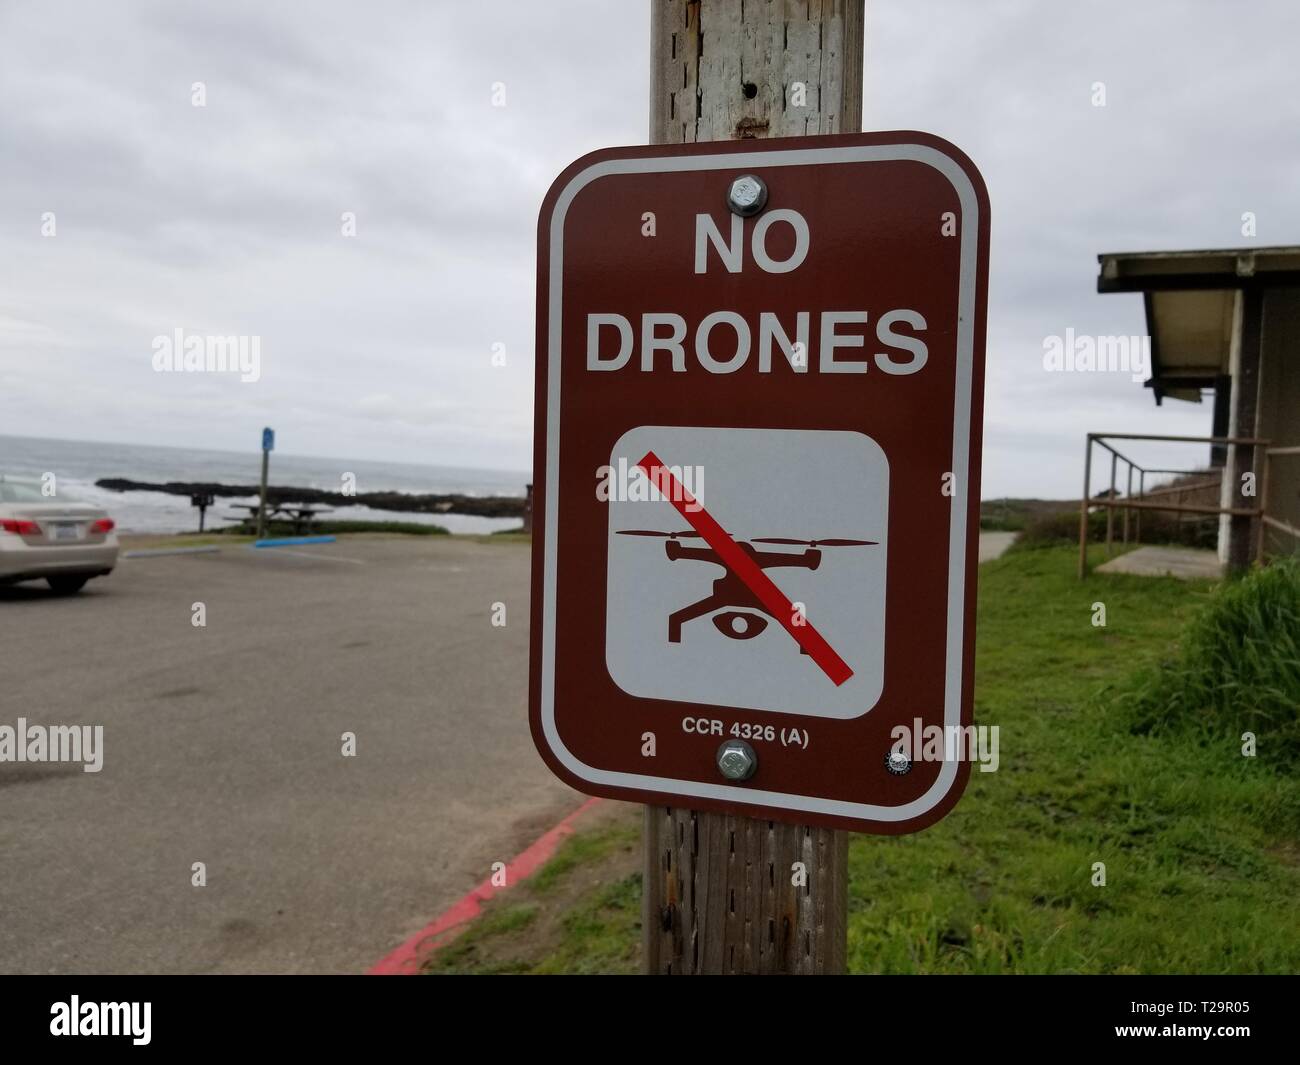 Close-up of sign reading No Drones, with a graphic of a drone Unmanned Aerial Vechicle (UAV) crossed out and a reference to California law CCR 4326, at Bean Hollow State Beach, Pescadero, California, March 4, 2019. () Stock Photo